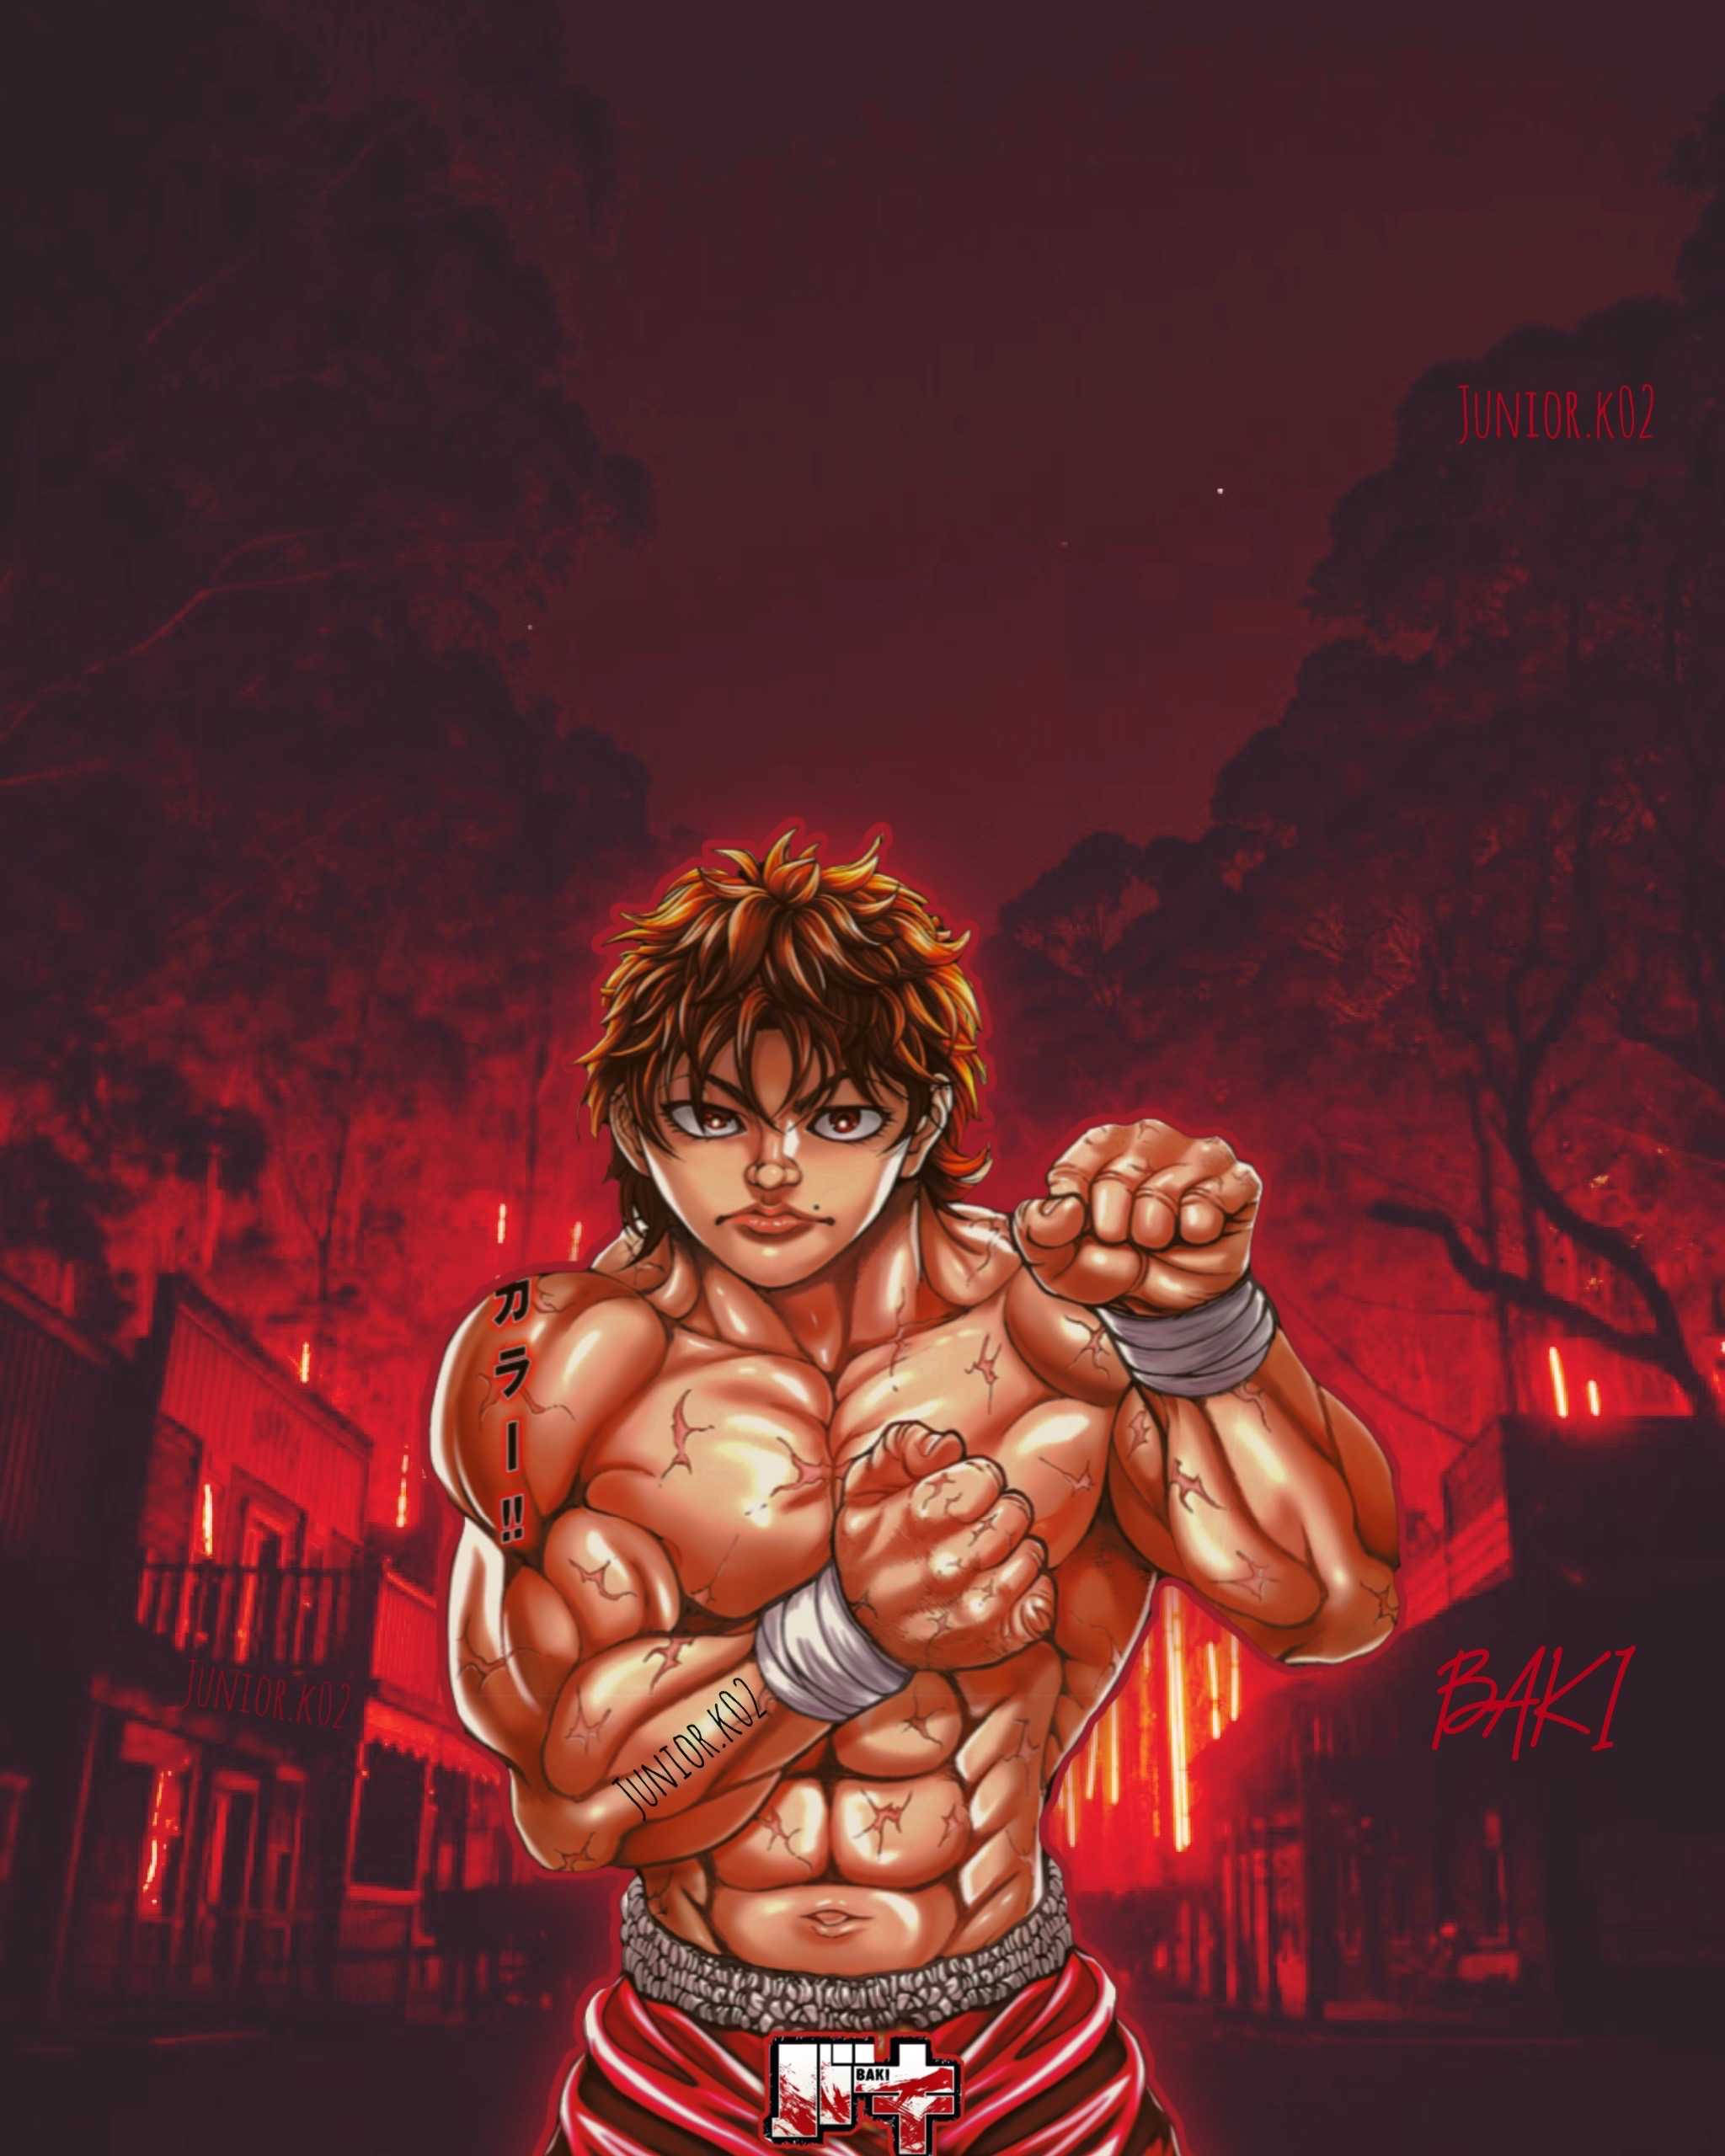 Didnt see any wallpapers of baki that I liked so I made my own   riphonewallpapers